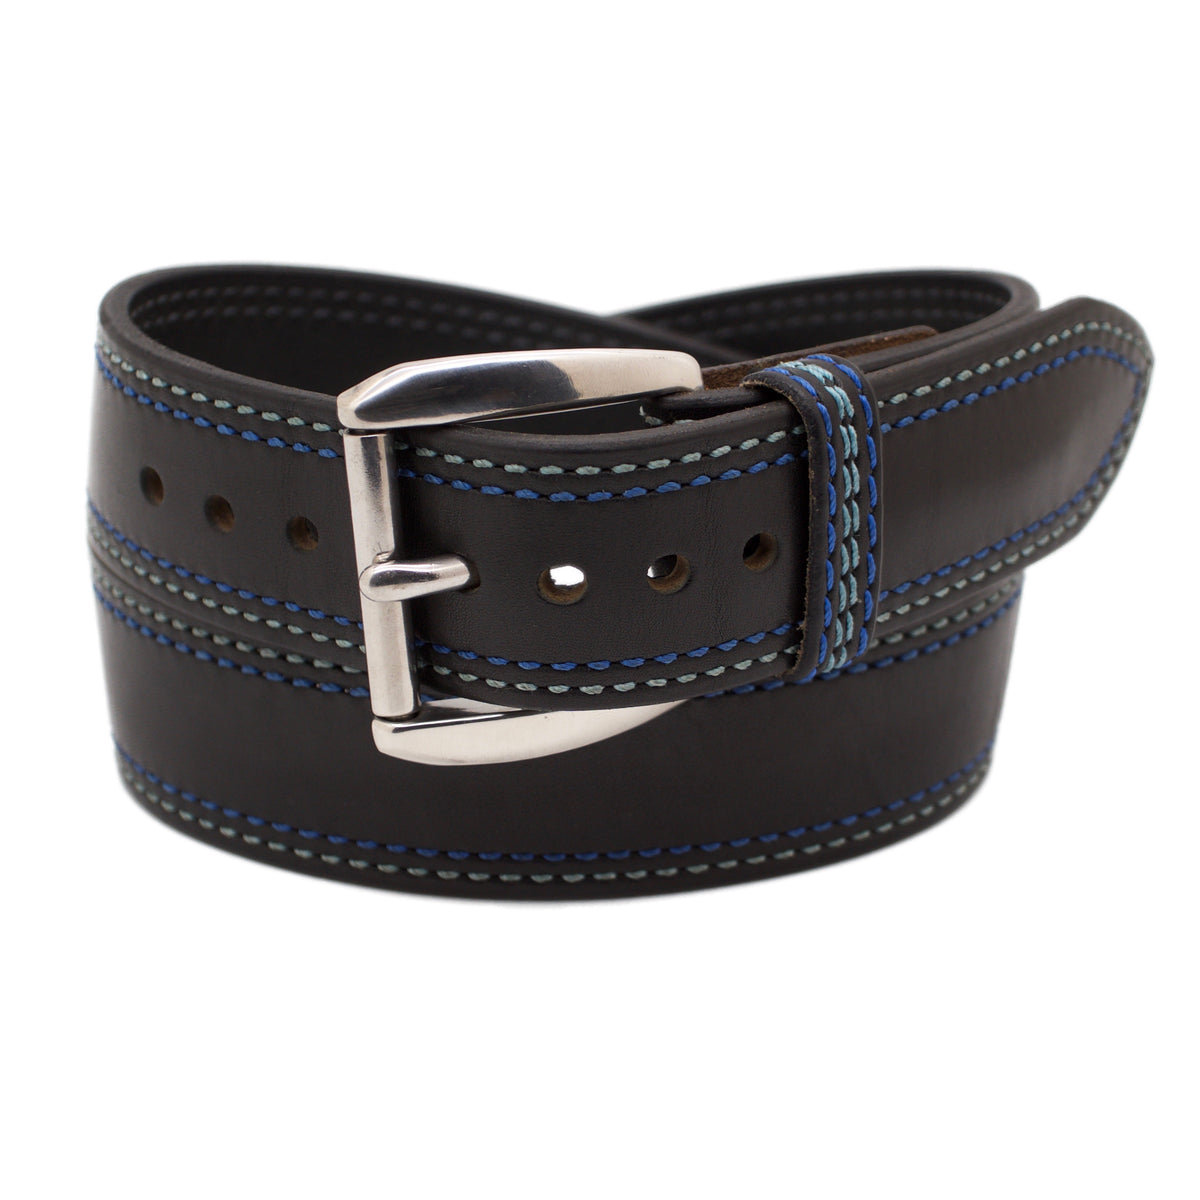 The SHELBY Wide 1.75 Leather Belt